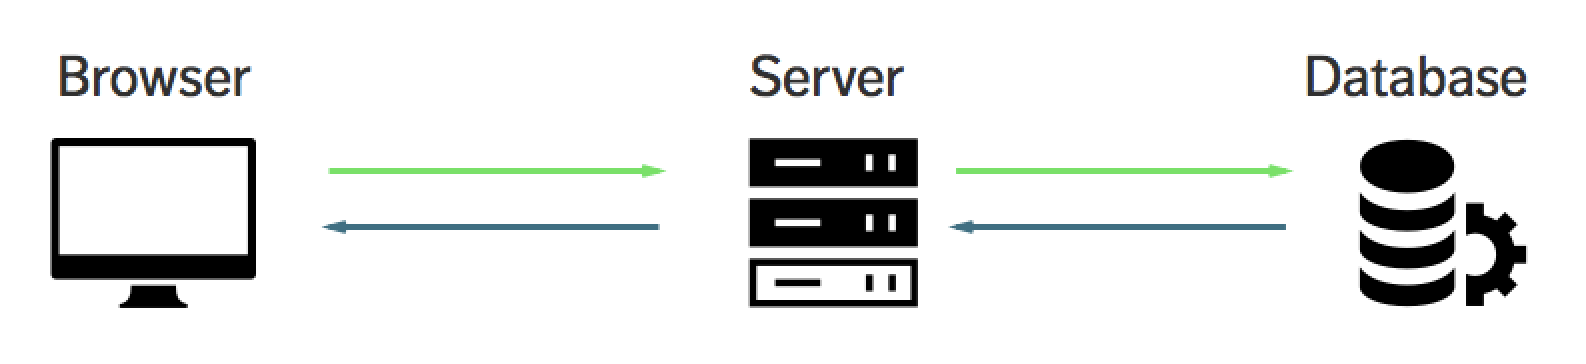 Image of a frontend, a server, and a database.